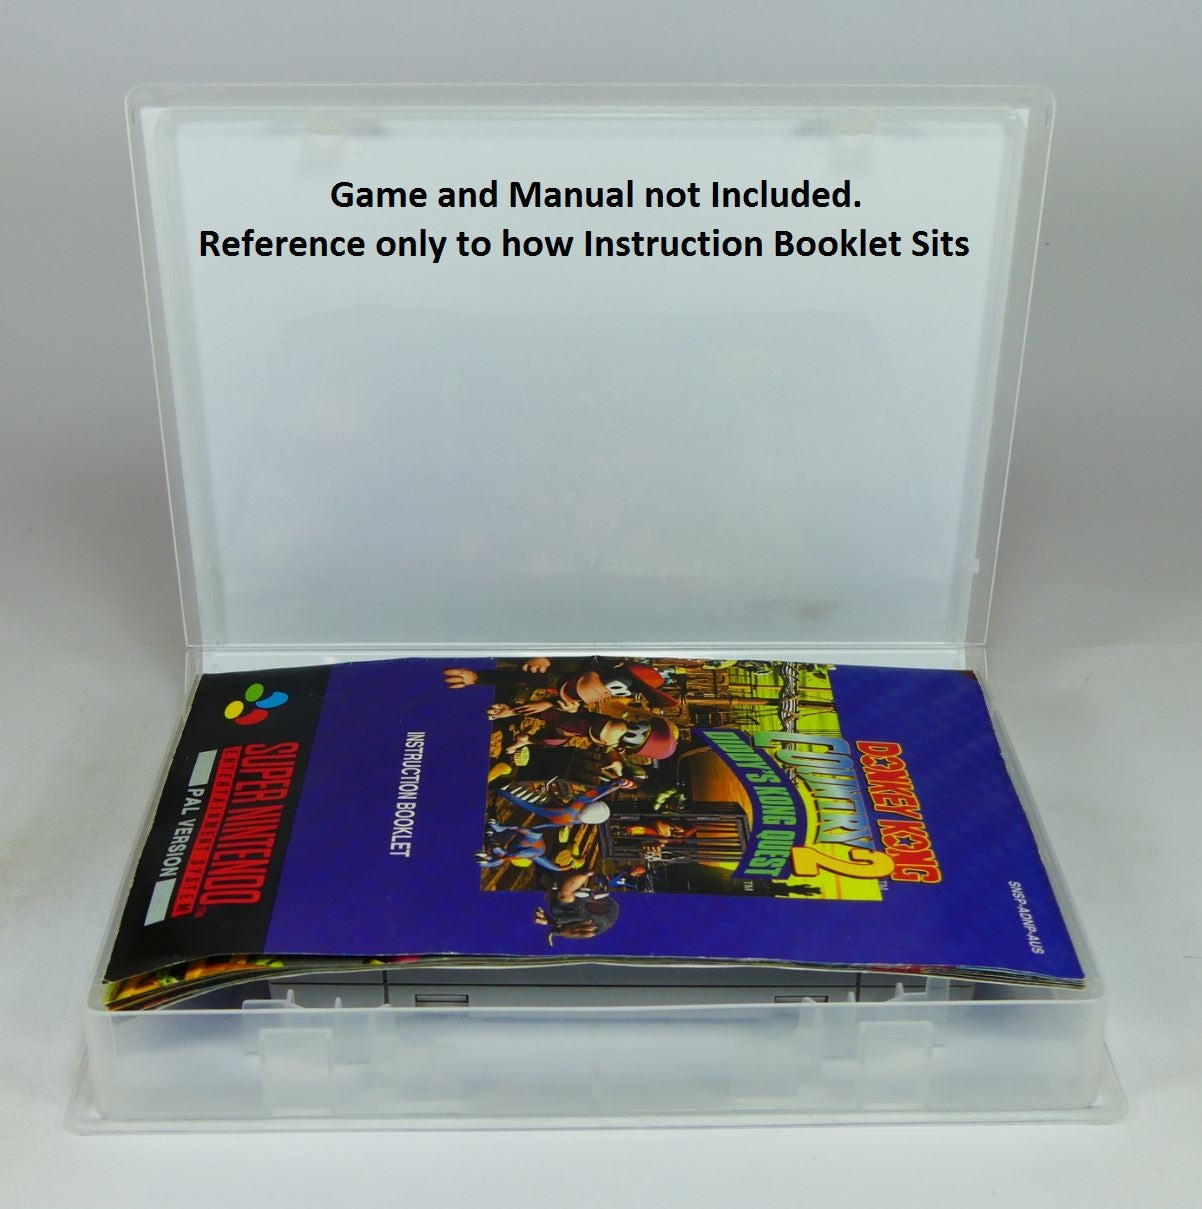 TMNT Tournament Fighters - SNES Replacement Case